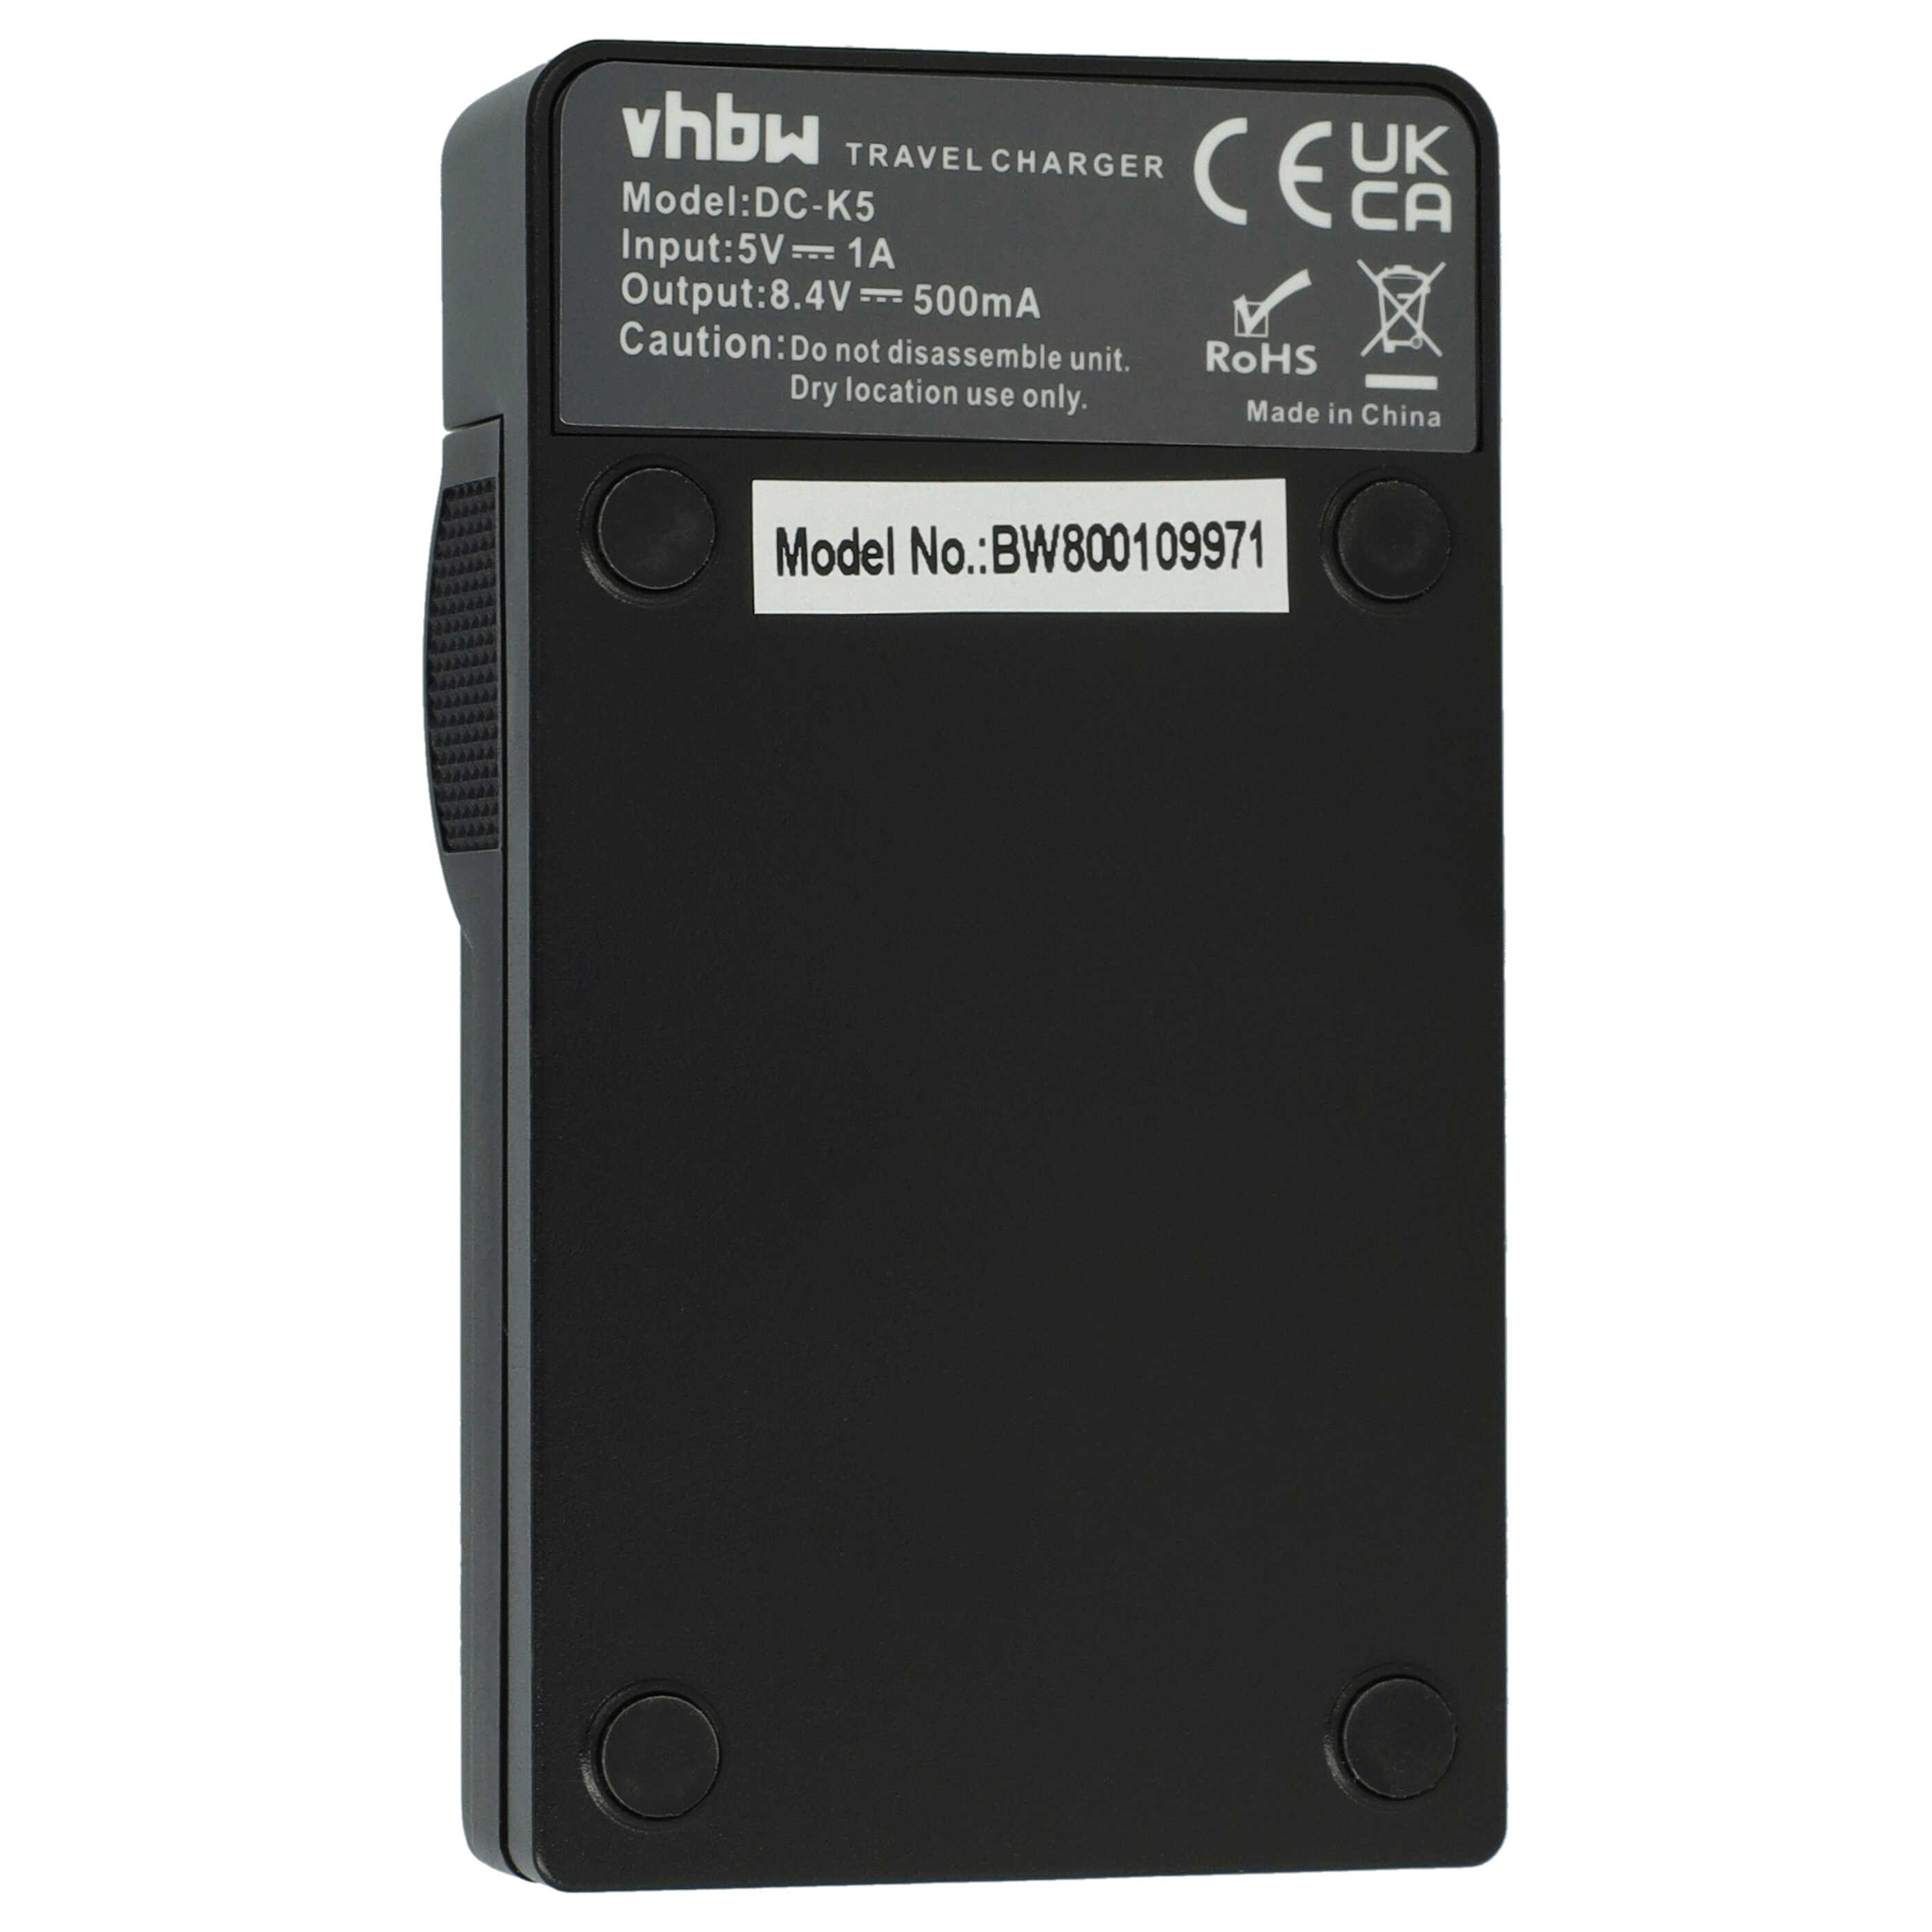 Battery Charger suitable for Samsung BP1310 Camera etc. - 0.5 A, 8.4 V